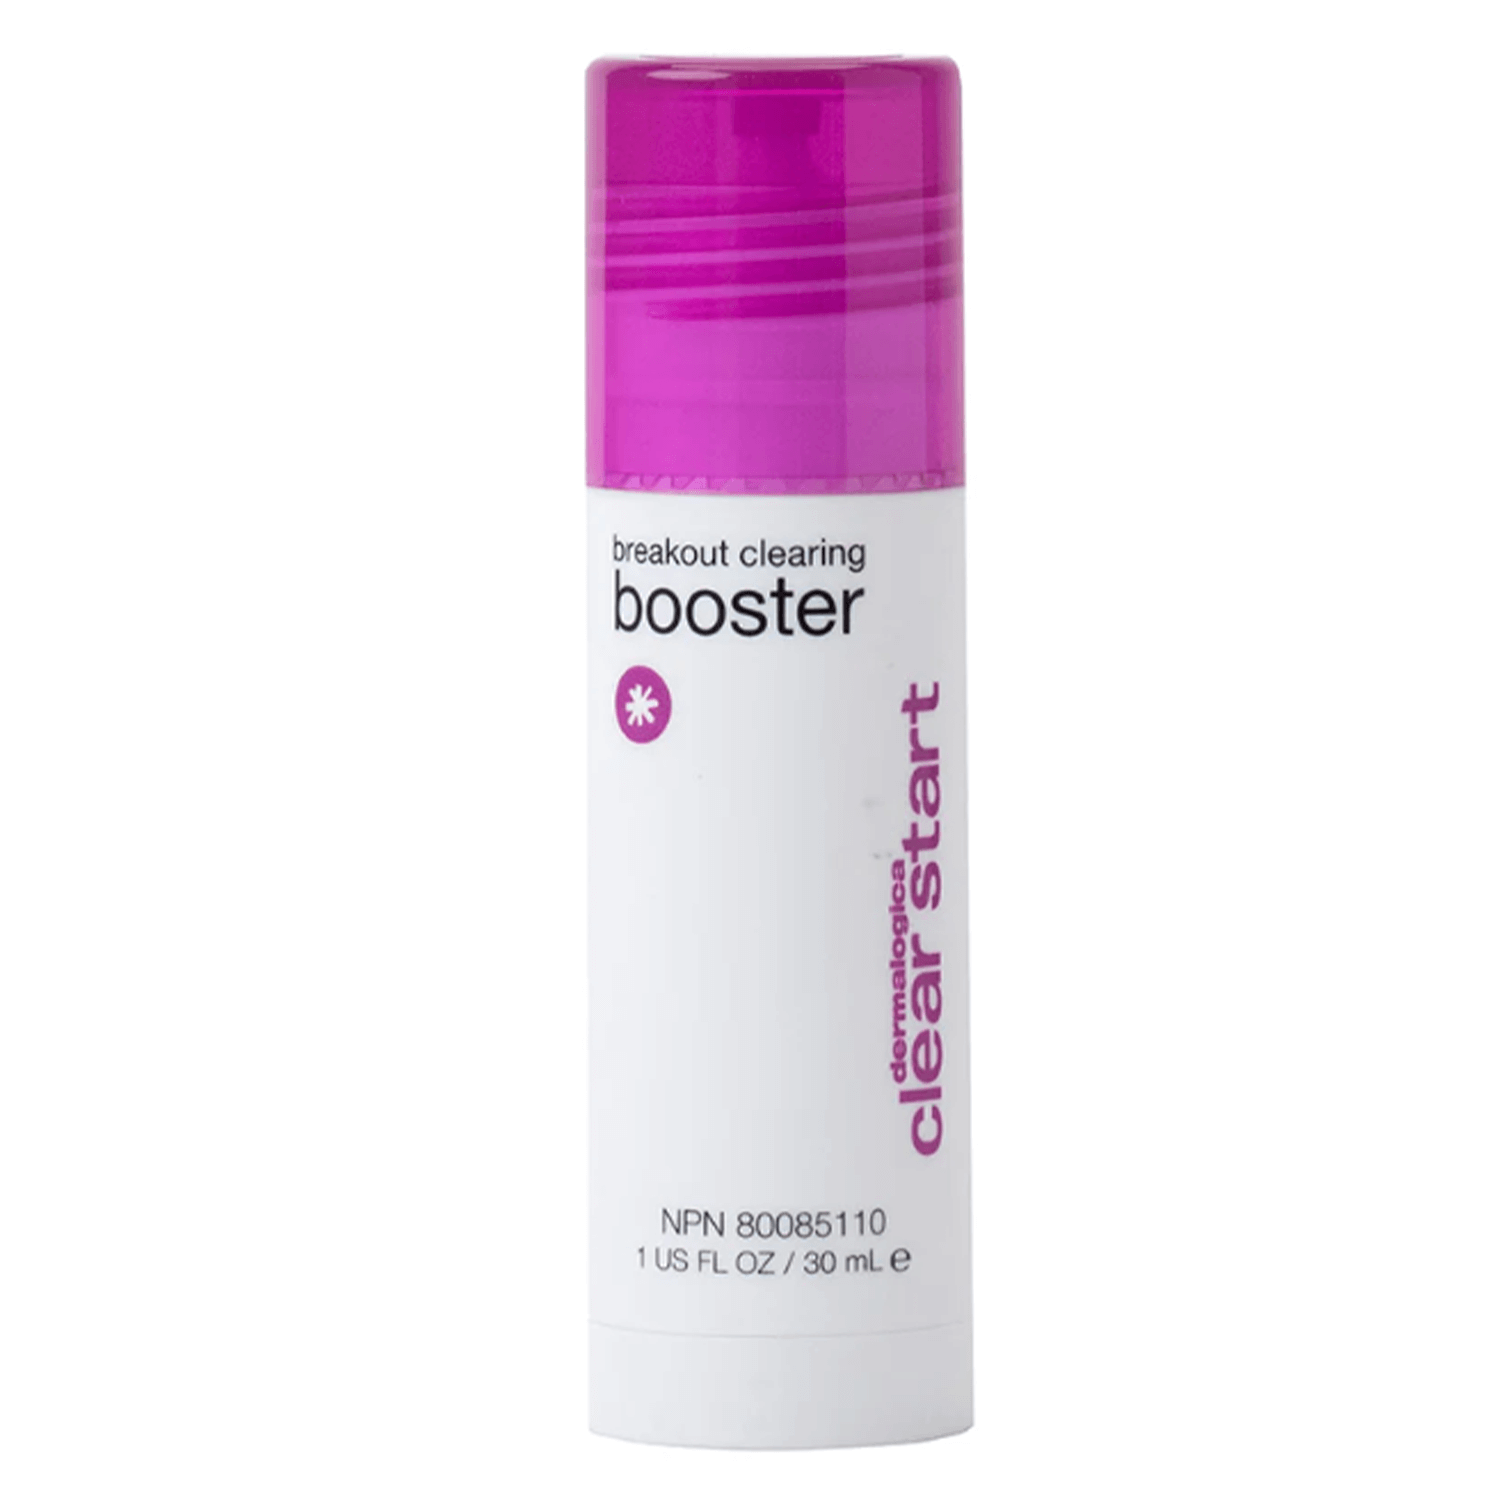 Product image from Clear Start - Breakout Clearing Booster